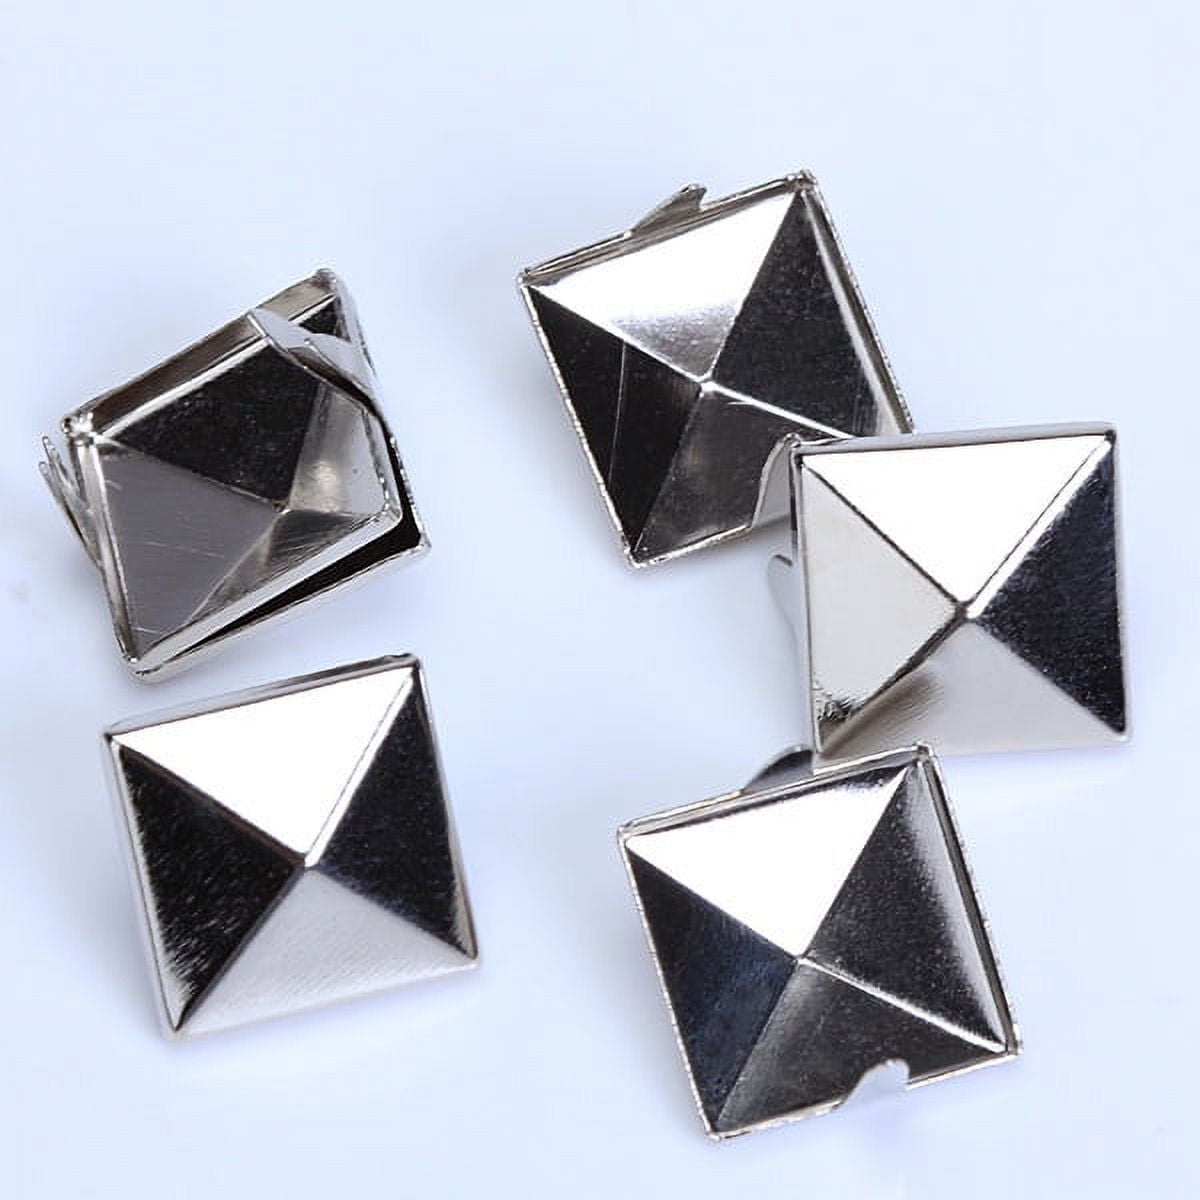  Giant Pyramid Studs - Size 25 - Ideally used for Denim and  Leather Work - Classic Two-Prong Studs - Available in Silver Color - Pack  of 25 : Arts, Crafts & Sewing